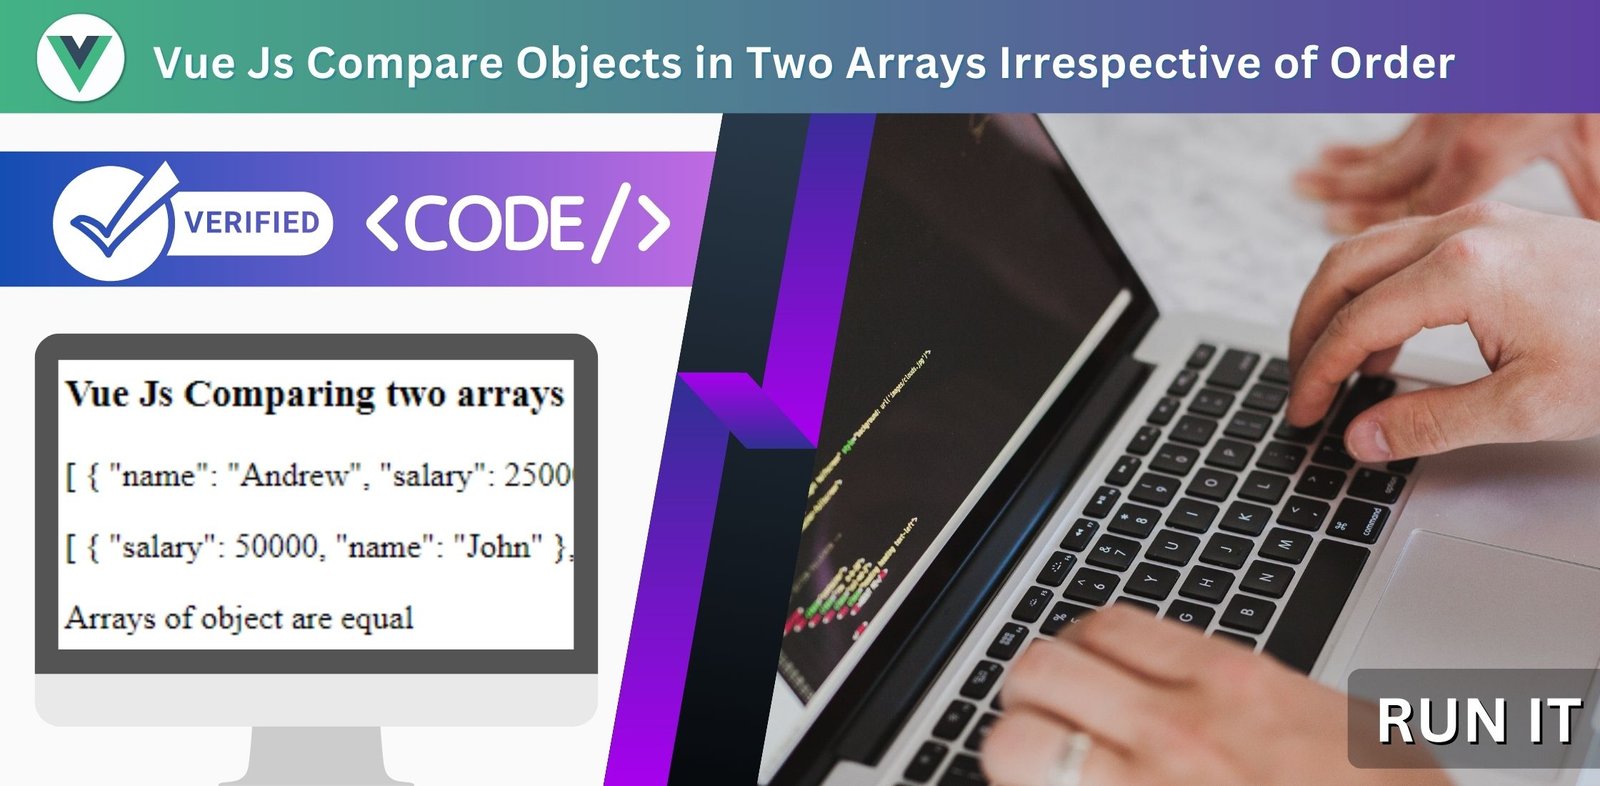 Vue Js Compare Objects in Two Arrays Irrespective of Order